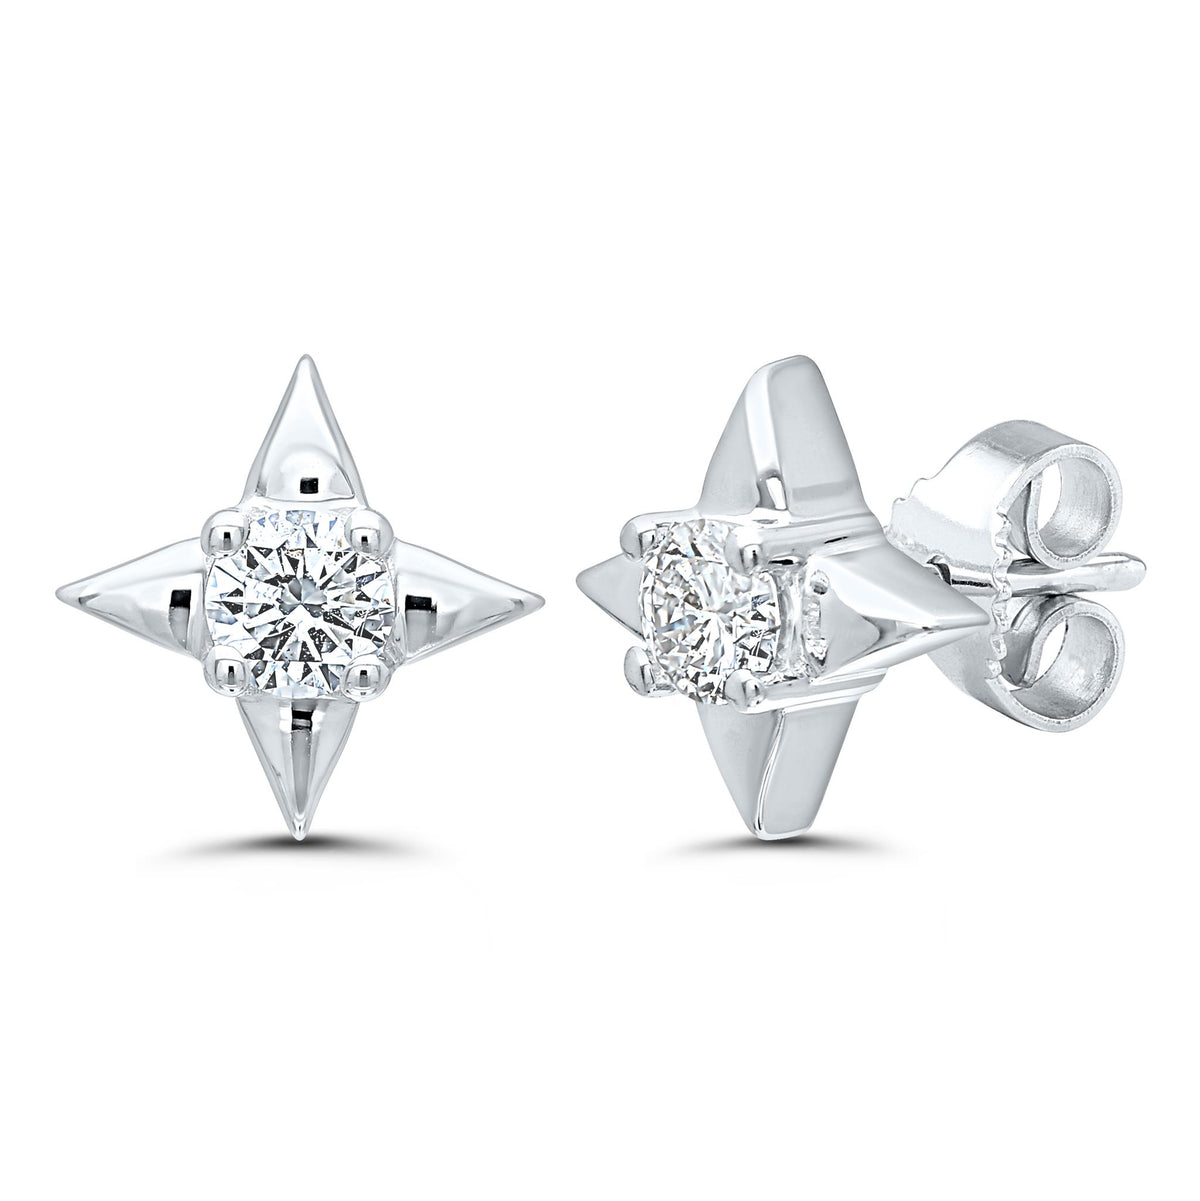 Star Of Hope 14Kt White Gold Earrings with.25cttw Natural Diamonds